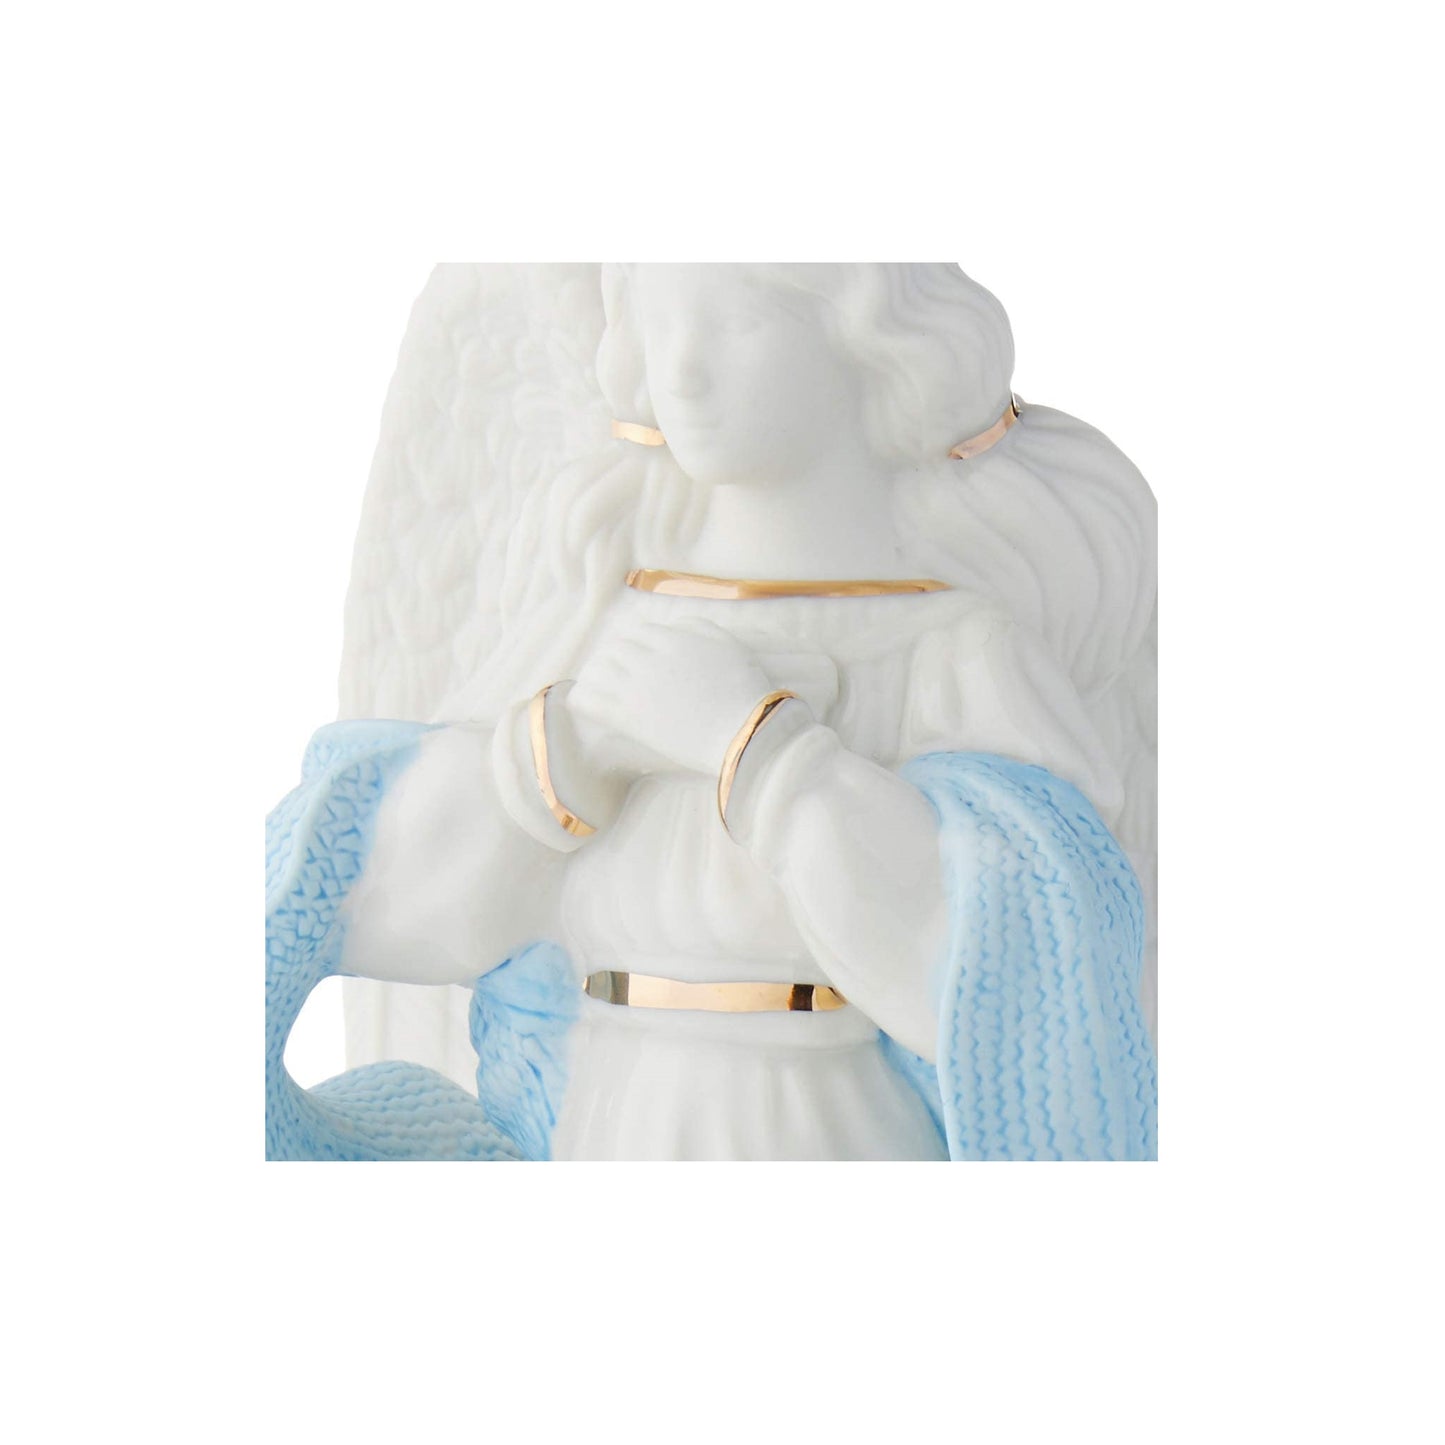 First Blessing Nativity Angel of Hope Figurine by Lenox